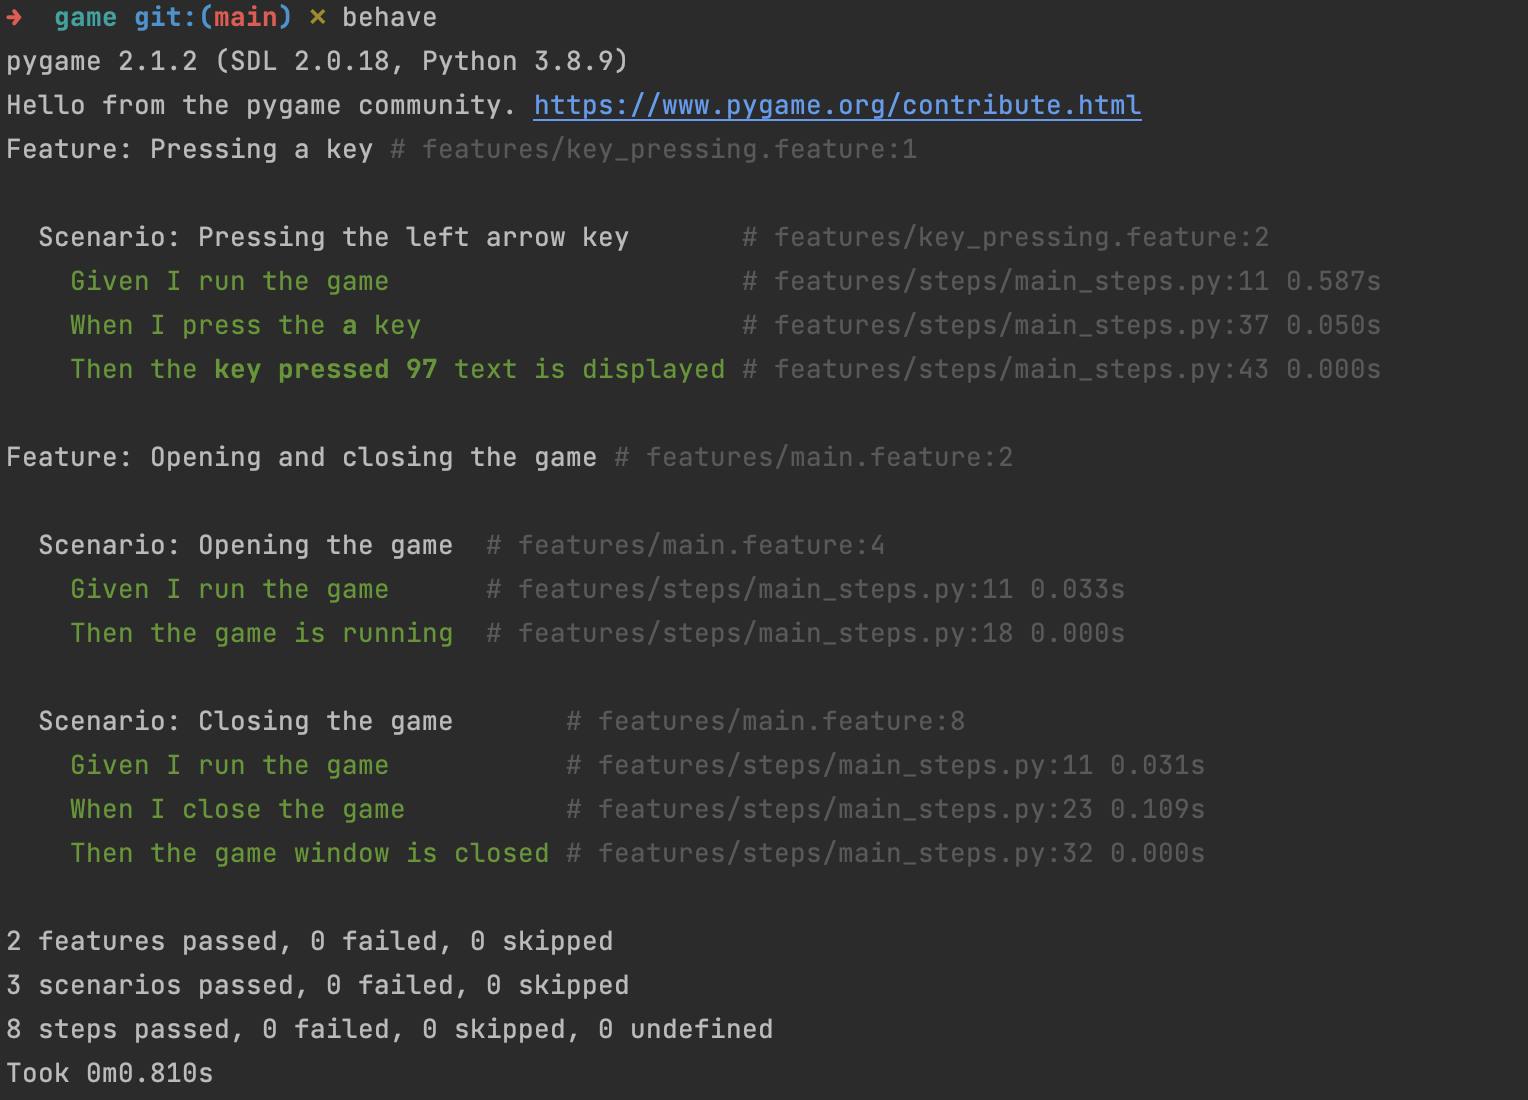 pygame 2.1.2 (SDL 2.0.18, Python 3.8.9) Hello from the pygame community. https://www.pygame.org/contribute.html Feature: Pressing a key # features/key_pressing.feature:1    Scenario: Pressing the left arrow key       # features/key_pressing.feature:2     Given I run the game                      # features/steps/main_steps.py:11 0.587s     When I press the a key                    # features/steps/main_steps.py:37 0.050s     Then the key pressed 97 text is displayed # features/steps/main_steps.py:43 0.000s  Feature: Opening and closing the game # features/main.feature:2    Scenario: Opening the game  # features/main.feature:4     Given I run the game      # features/steps/main_steps.py:11 0.033s     Then the game is running  # features/steps/main_steps.py:18 0.000s    Scenario: Closing the game       # features/main.feature:8     Given I run the game           # features/steps/main_steps.py:11 0.031s     When I close the game          # features/steps/main_steps.py:23 0.109s     Then the game window is closed # features/steps/main_steps.py:32 0.000s  2 features passed, 0 failed, 0 skipped 3 scenarios passed, 0 failed, 0 skipped 8 steps passed, 0 failed, 0 skipped, 0 undefined Took 0m0.810s